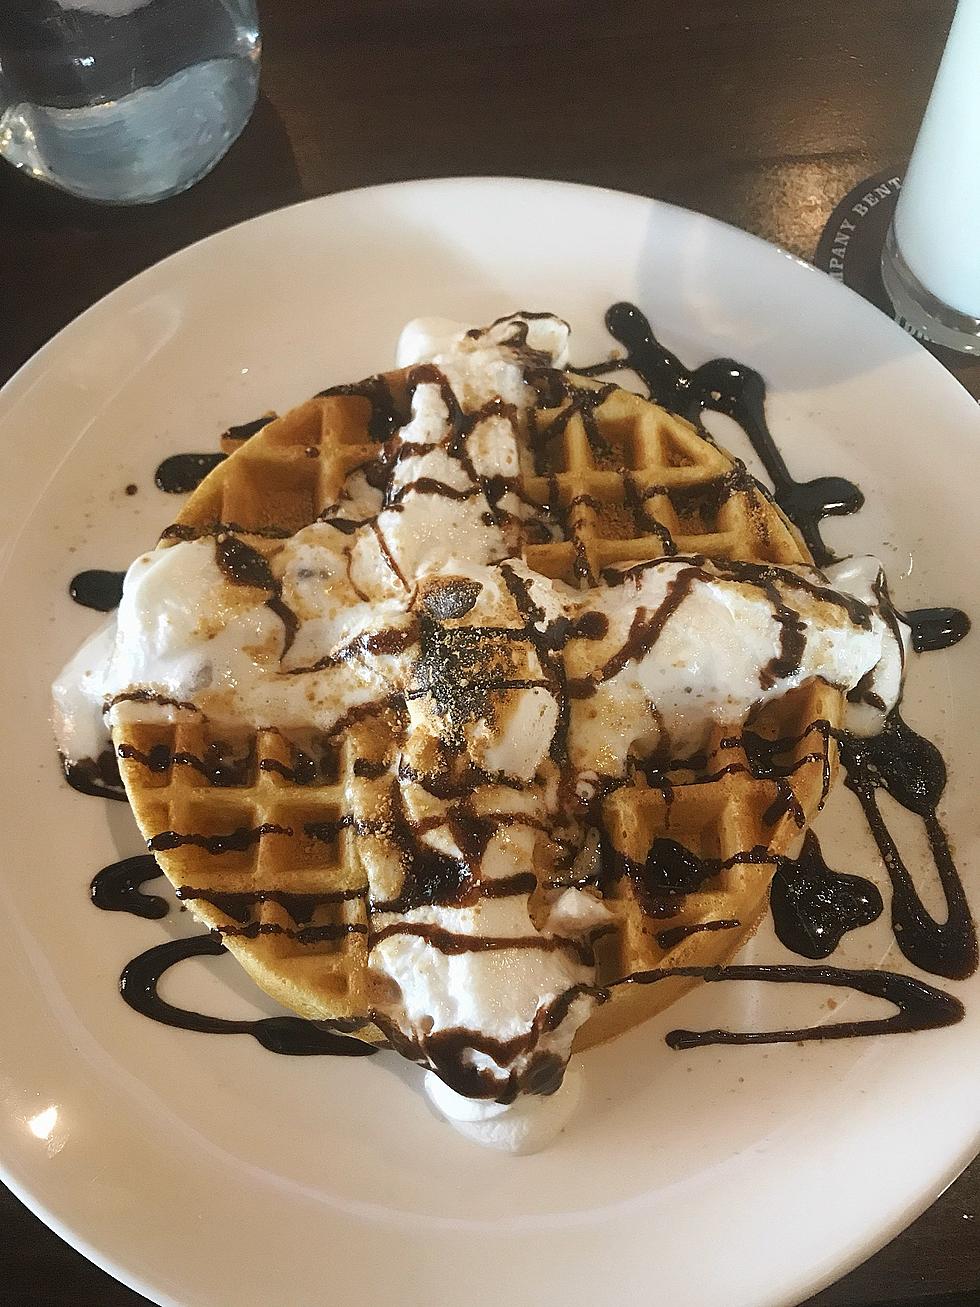 Found: The Best Waffle In Rochester